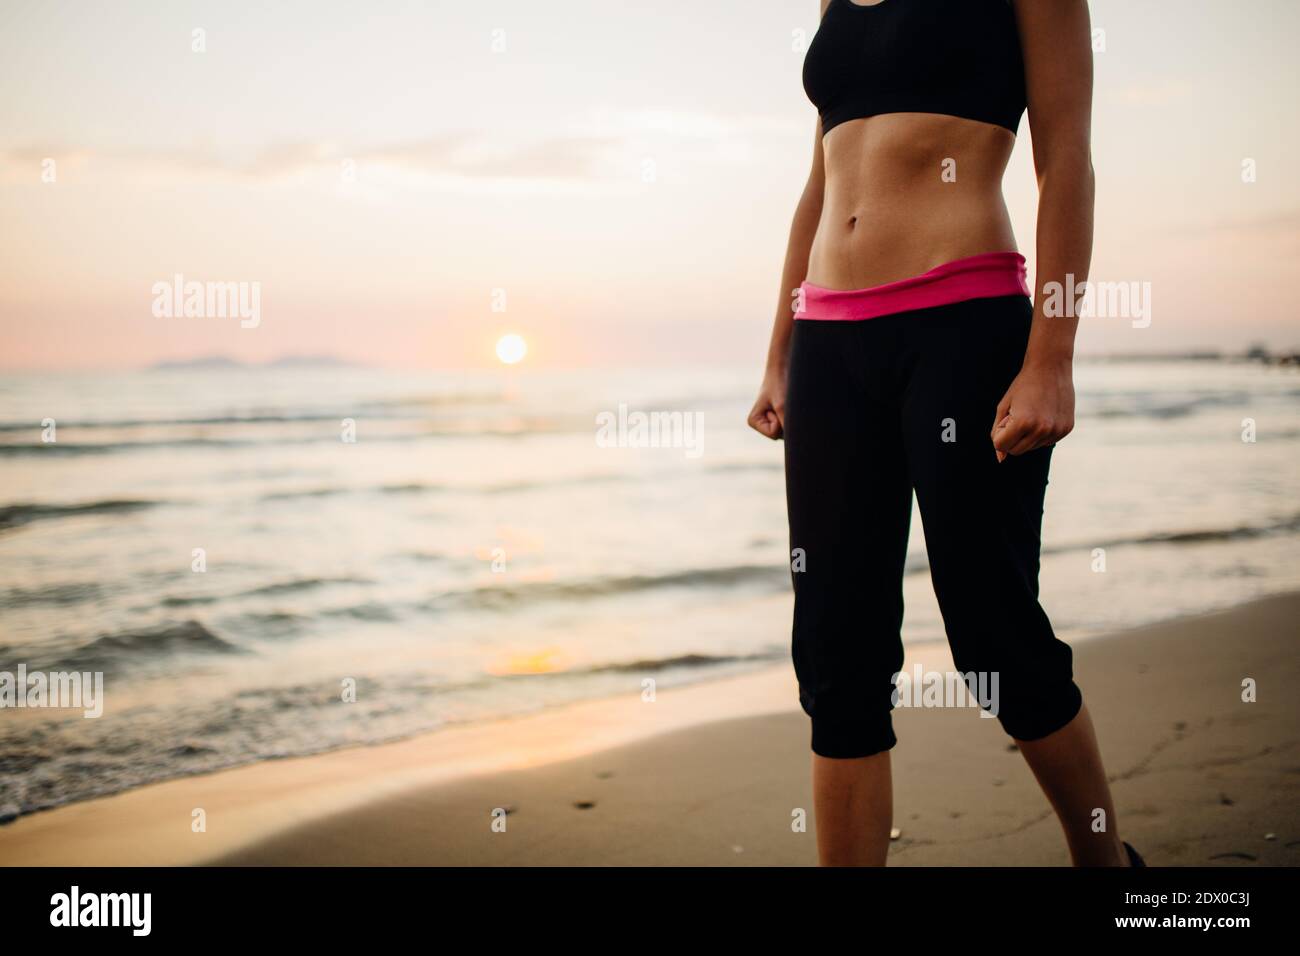 Runner woman jogging on beach in a sports bra top.Fit fitness woman training and working out outside as part of a healthy lifestyle.Fitness woman runn Stock Photo